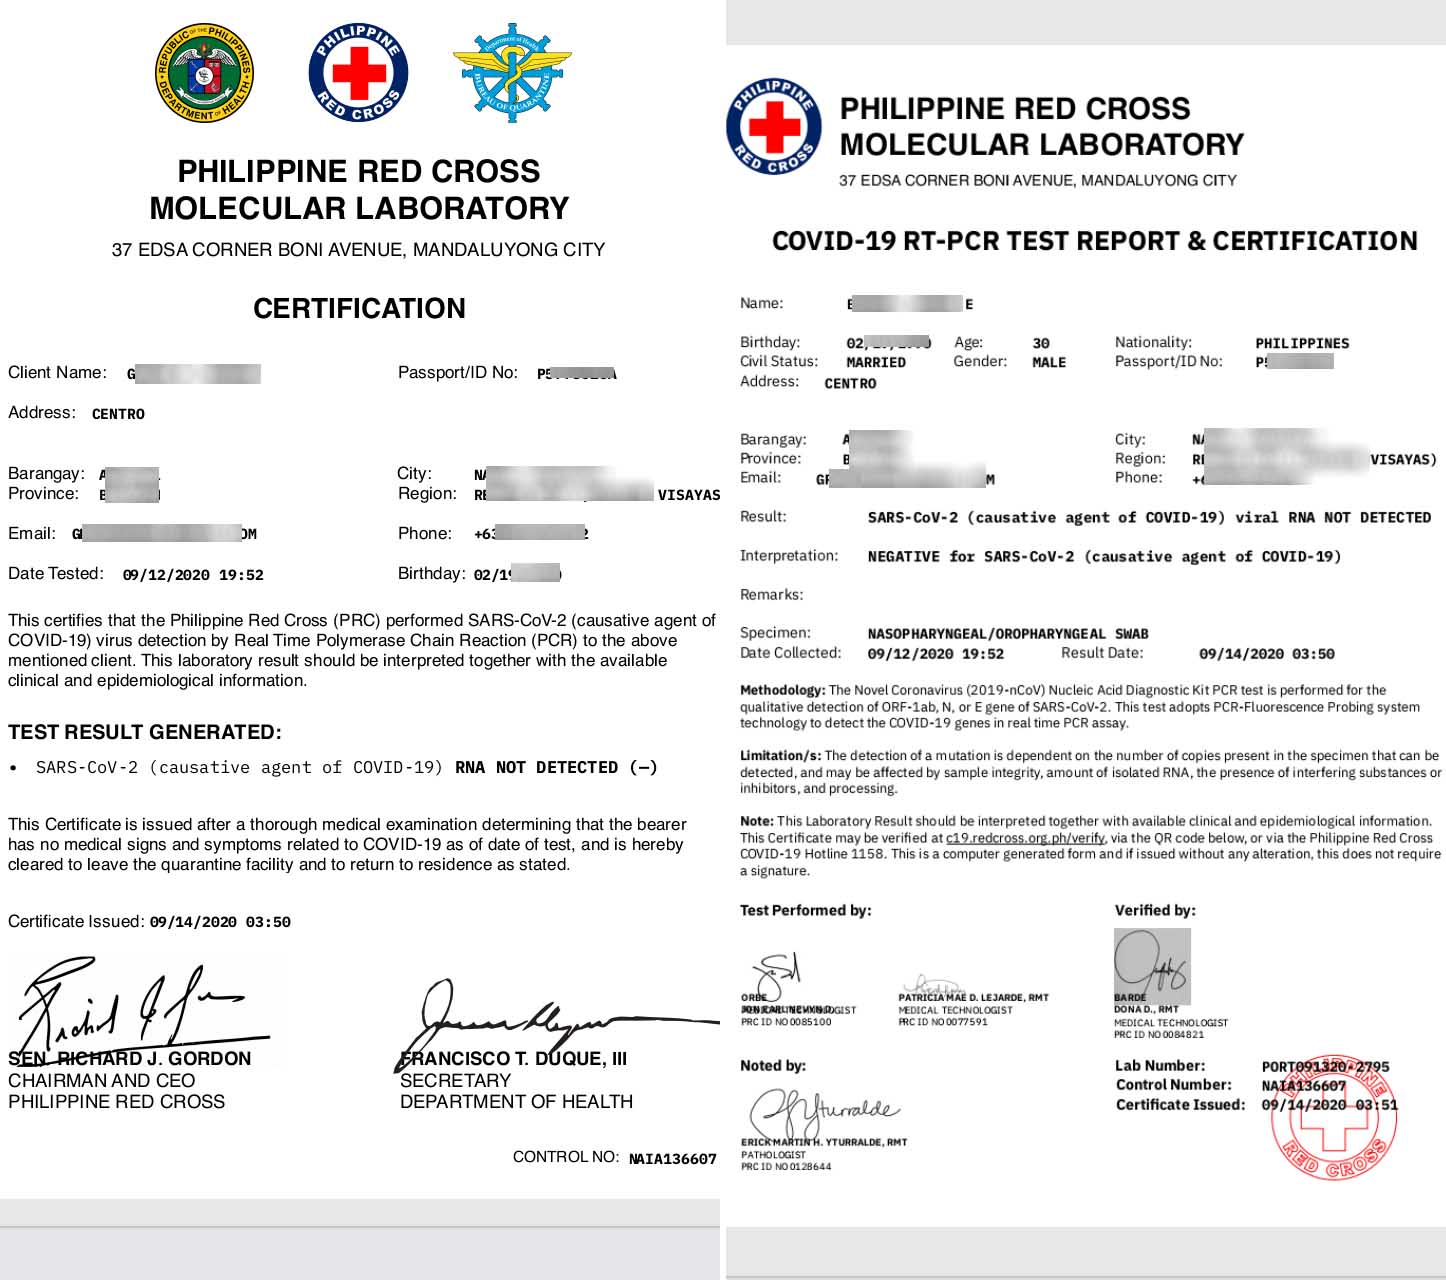 COVID-19 RT-PCR Test Result and Certification from the Philippine Red Cross Molecular Laboratory.